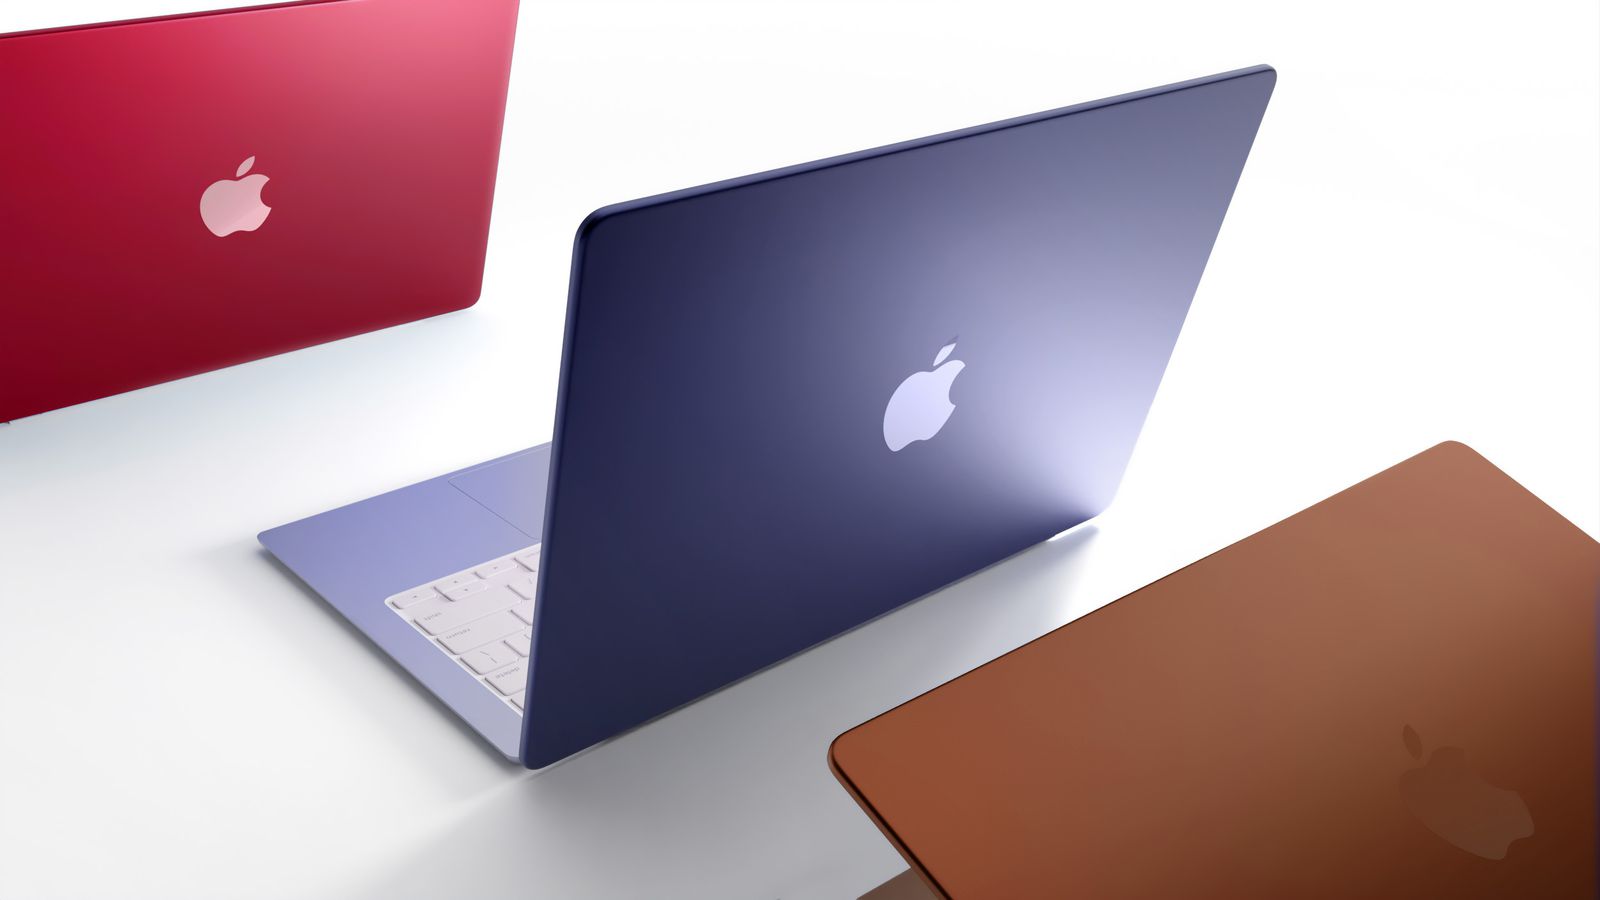 M2 MacBook Air Said to Be Among Most Likely WWDC Hardware